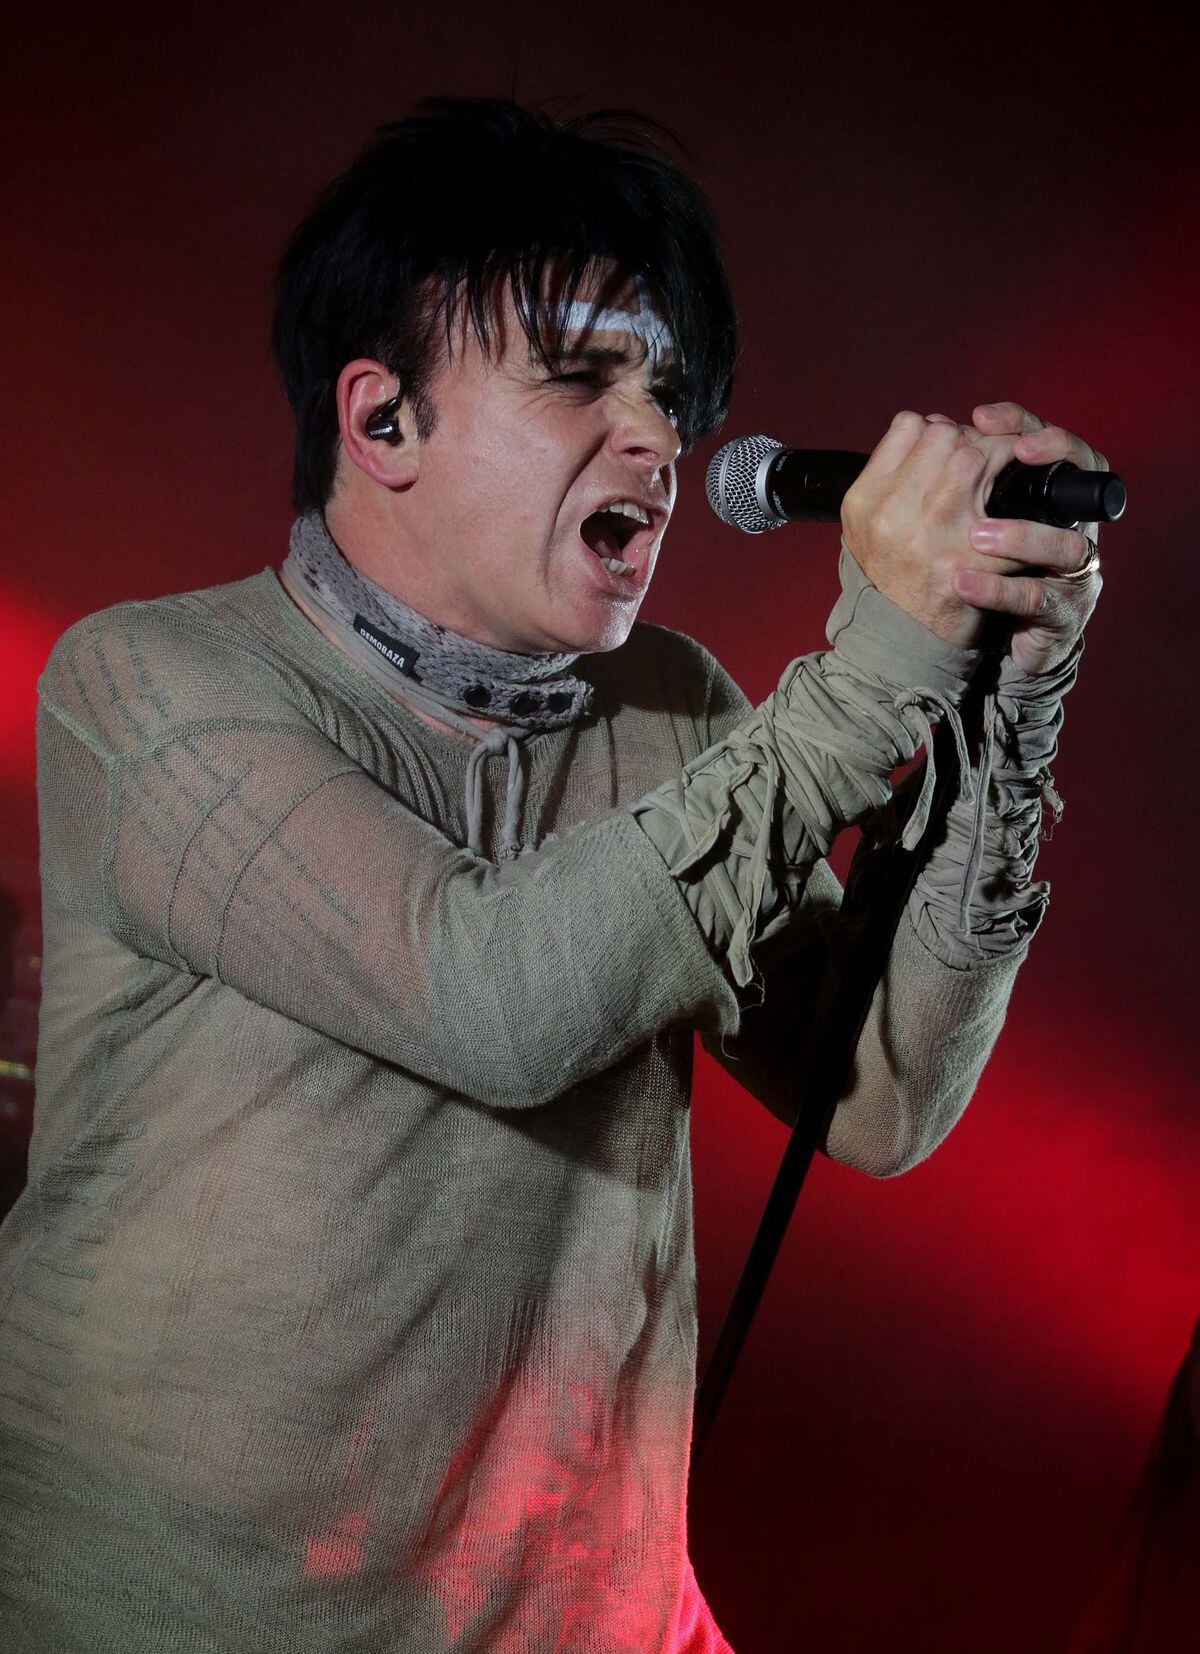 Gary Numan. Pictures by: Andy Shaw